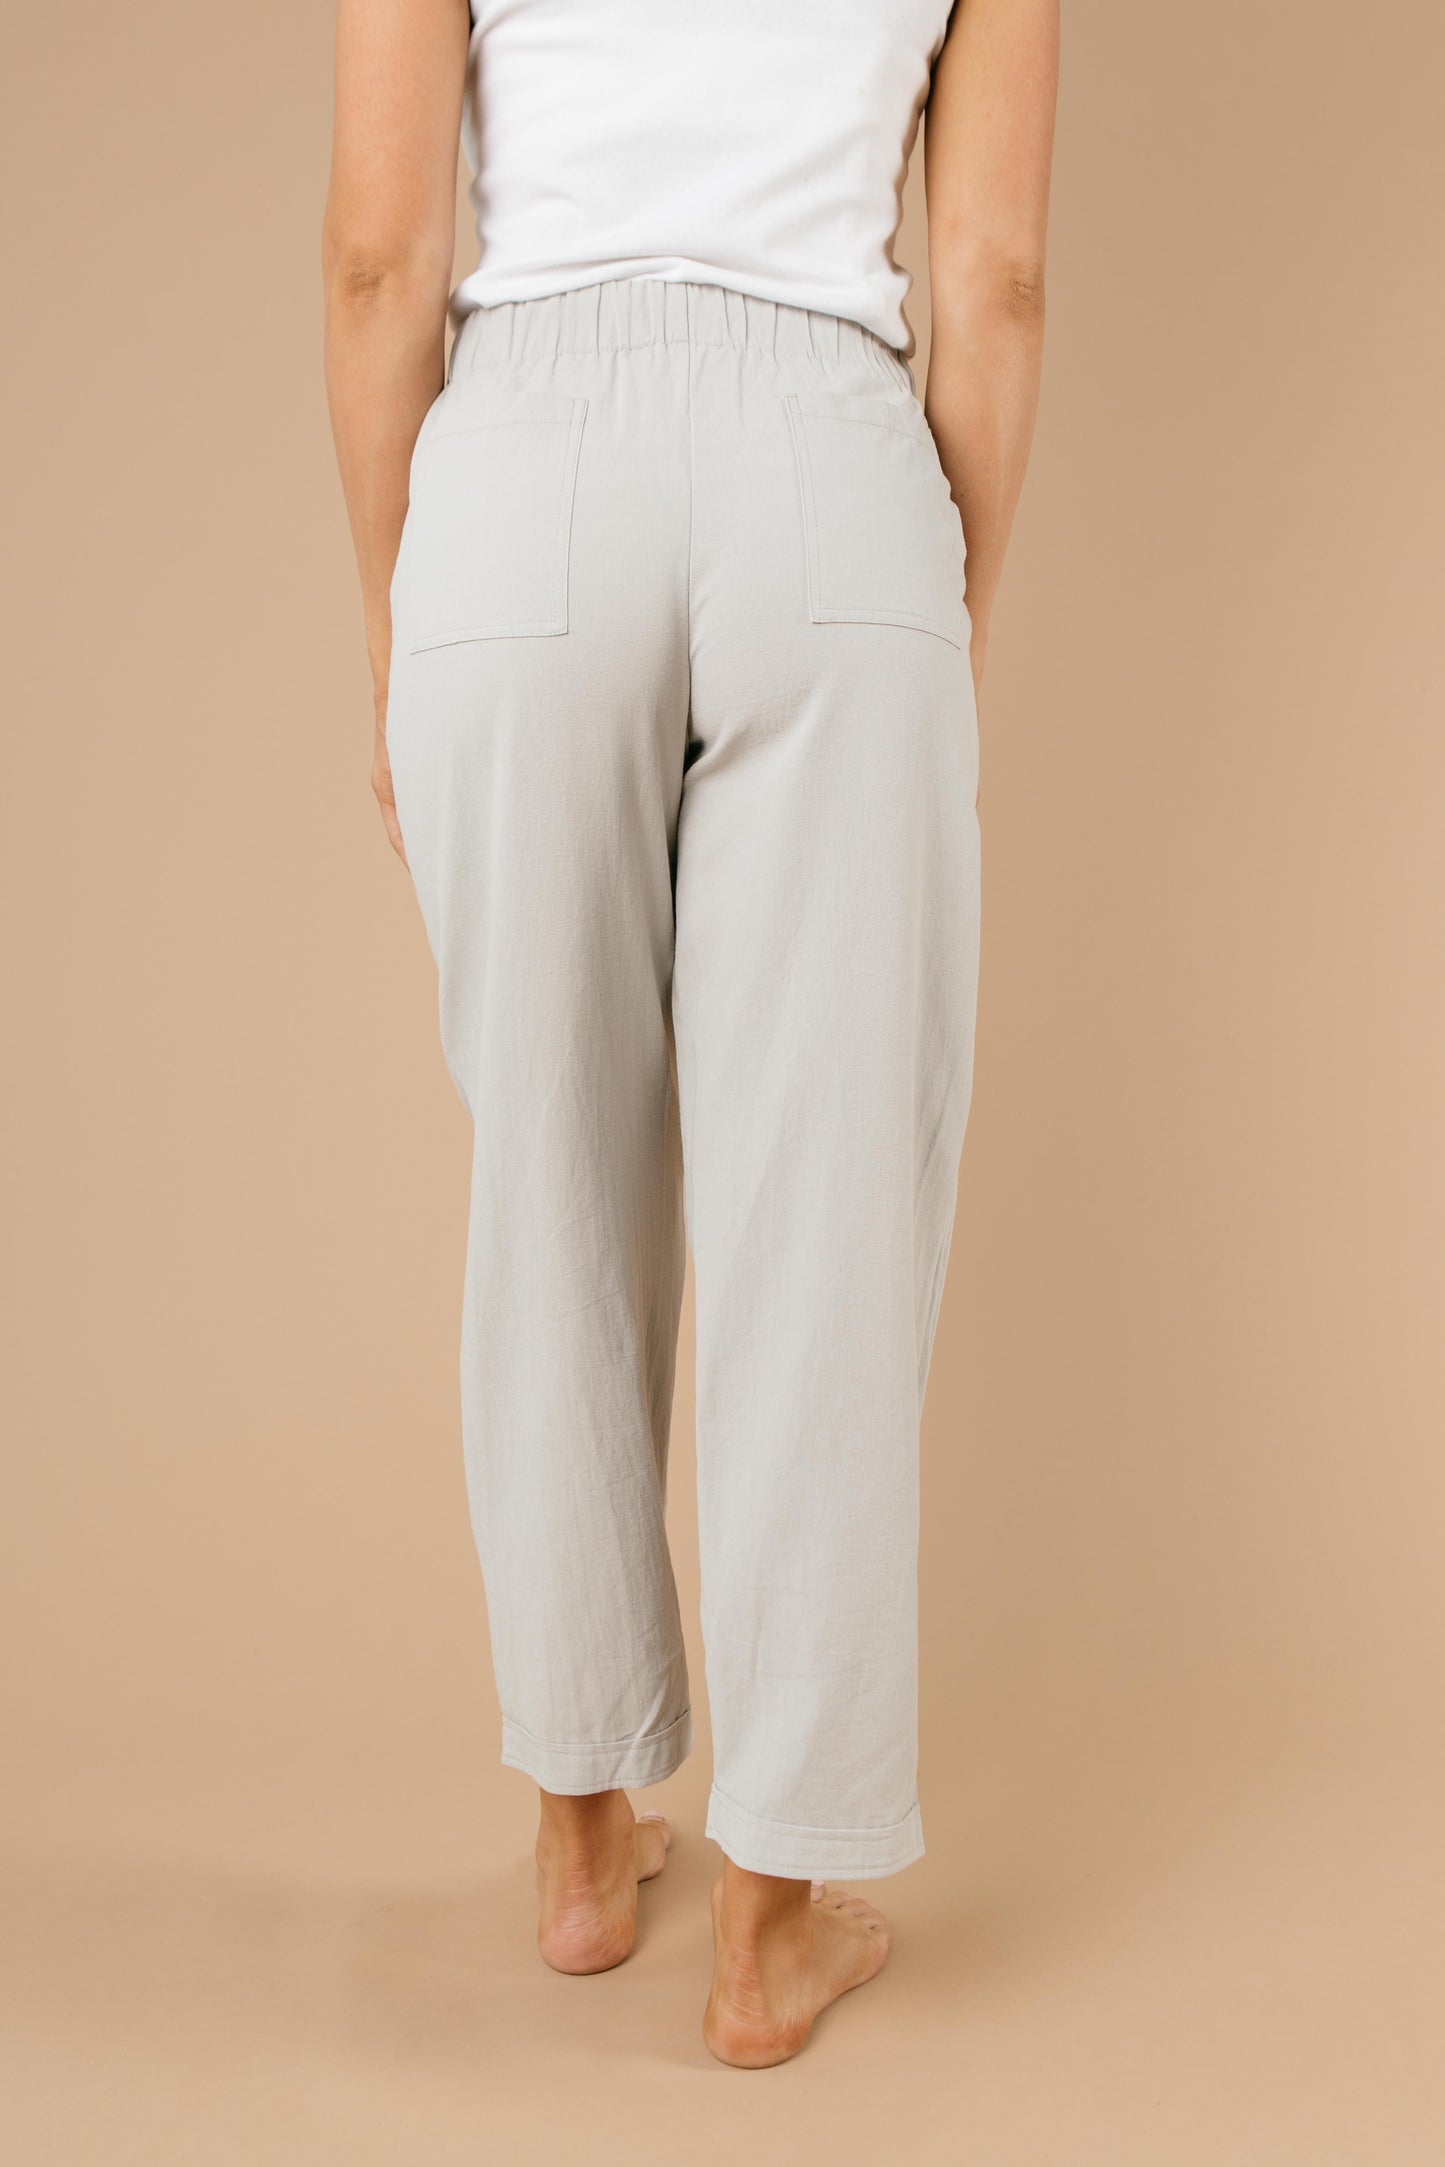 Transitions Cropped Pants In Gray-Womens-Modish Lily, Tecumseh Michigan